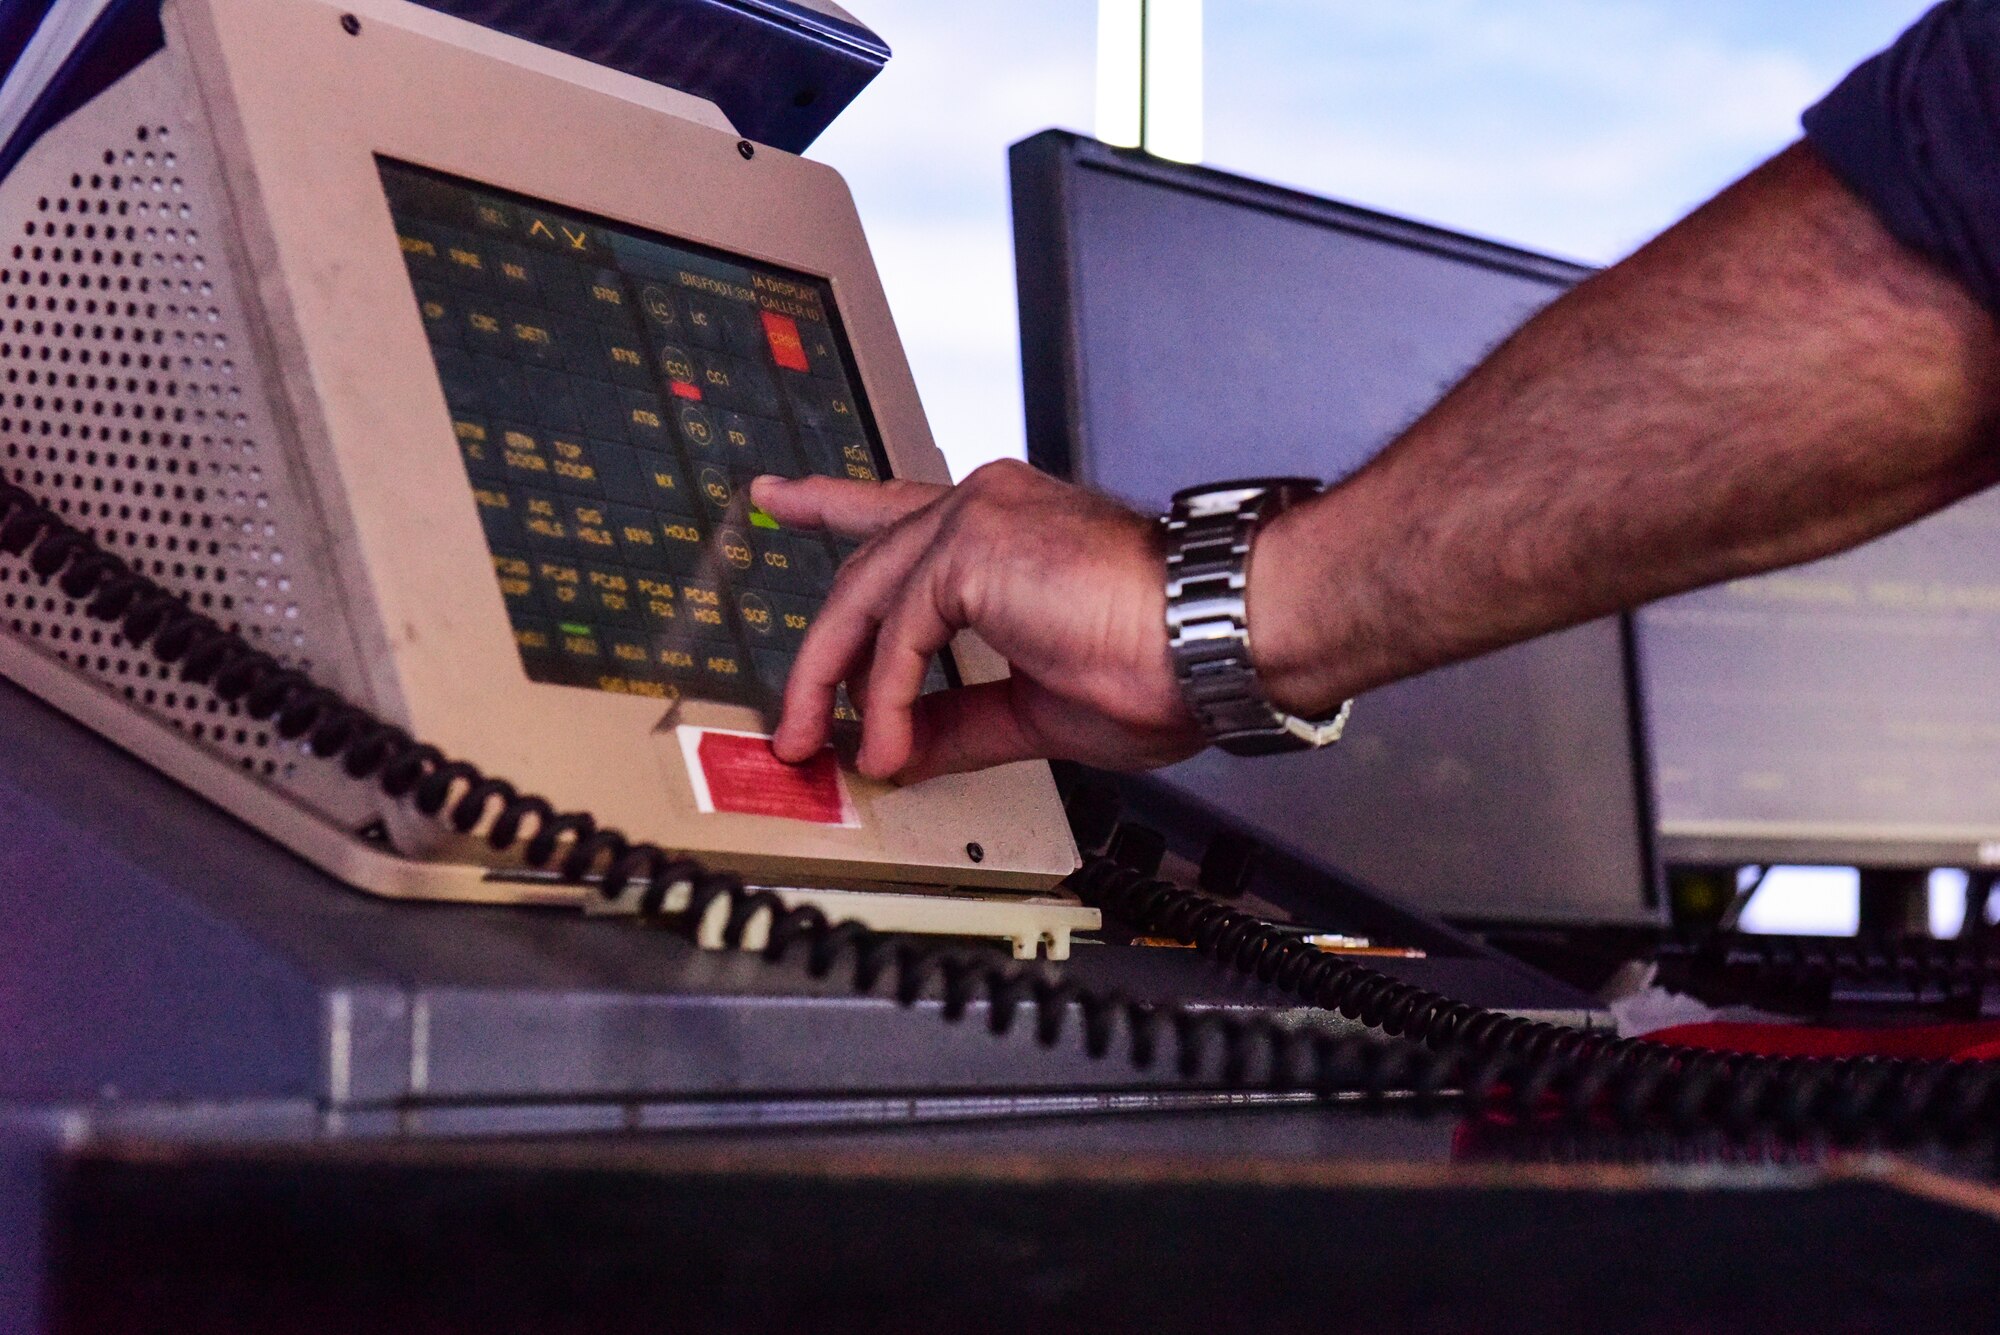 A photo of the watch supervisor touching a computer